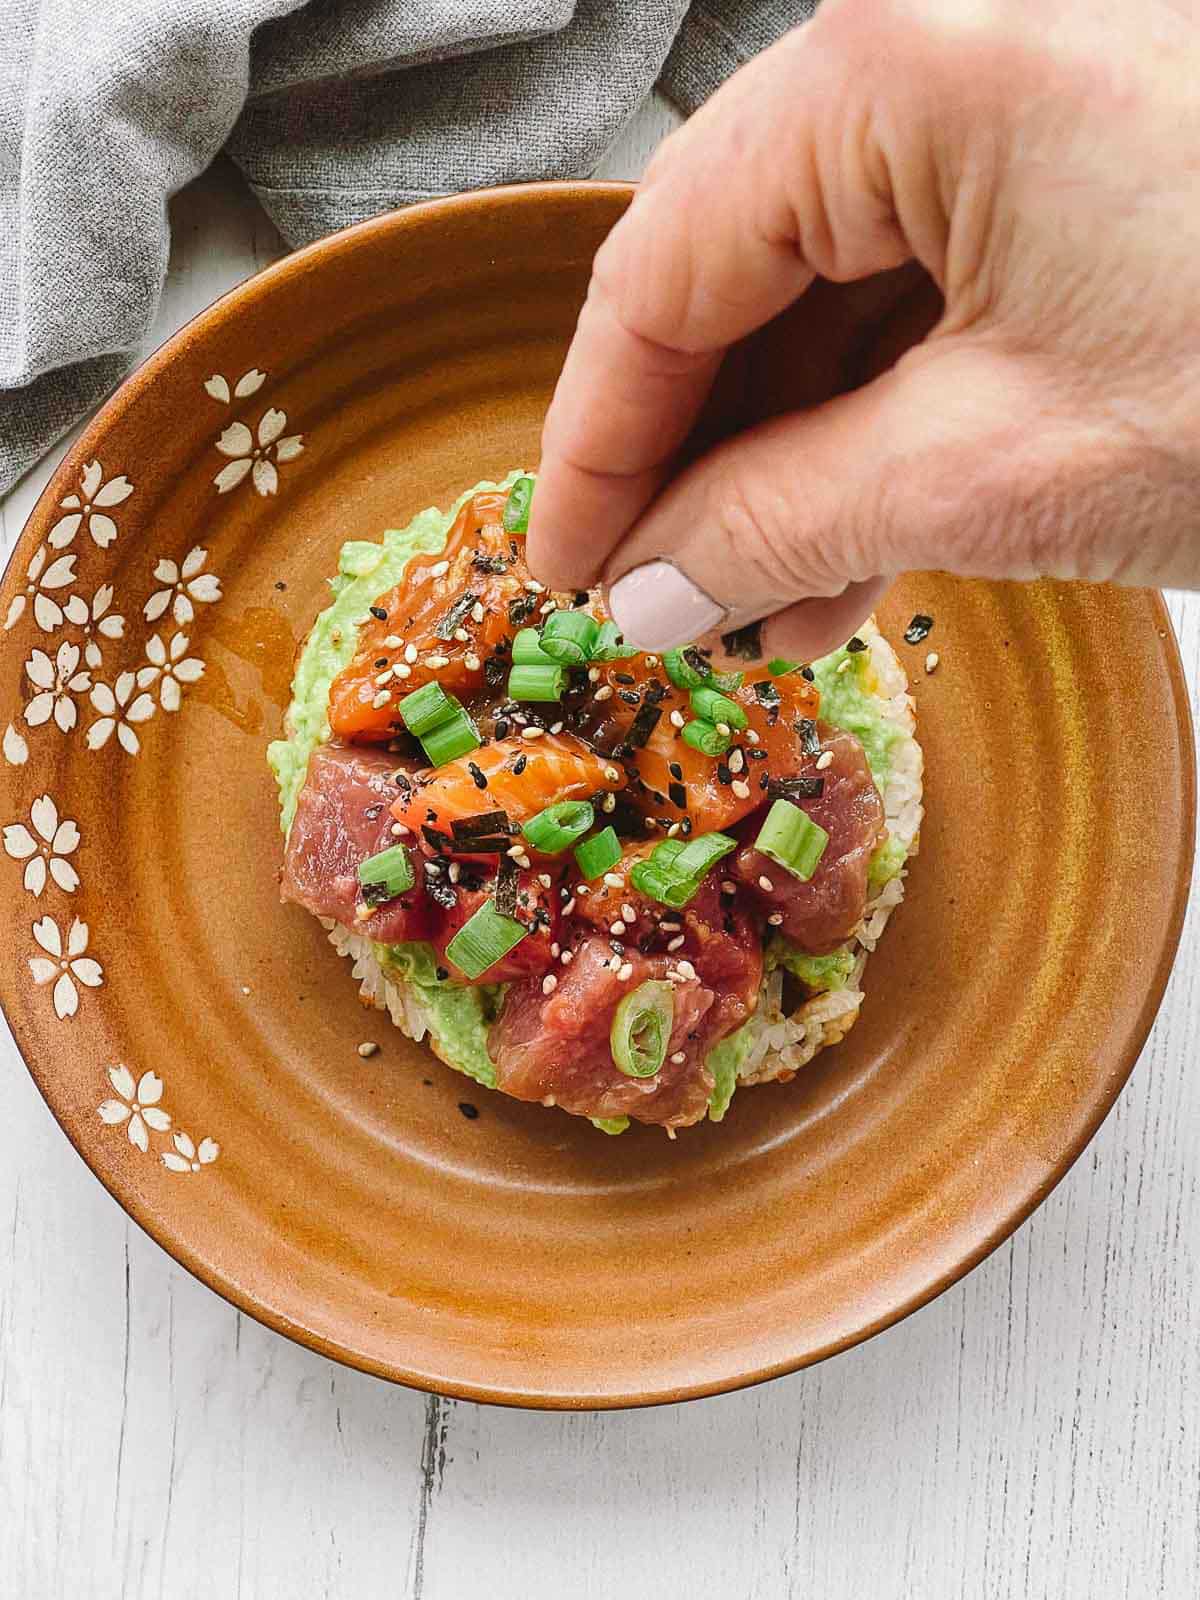 A hand sprinkling sesame seeds on top of a sushi waffle on a brown plate.